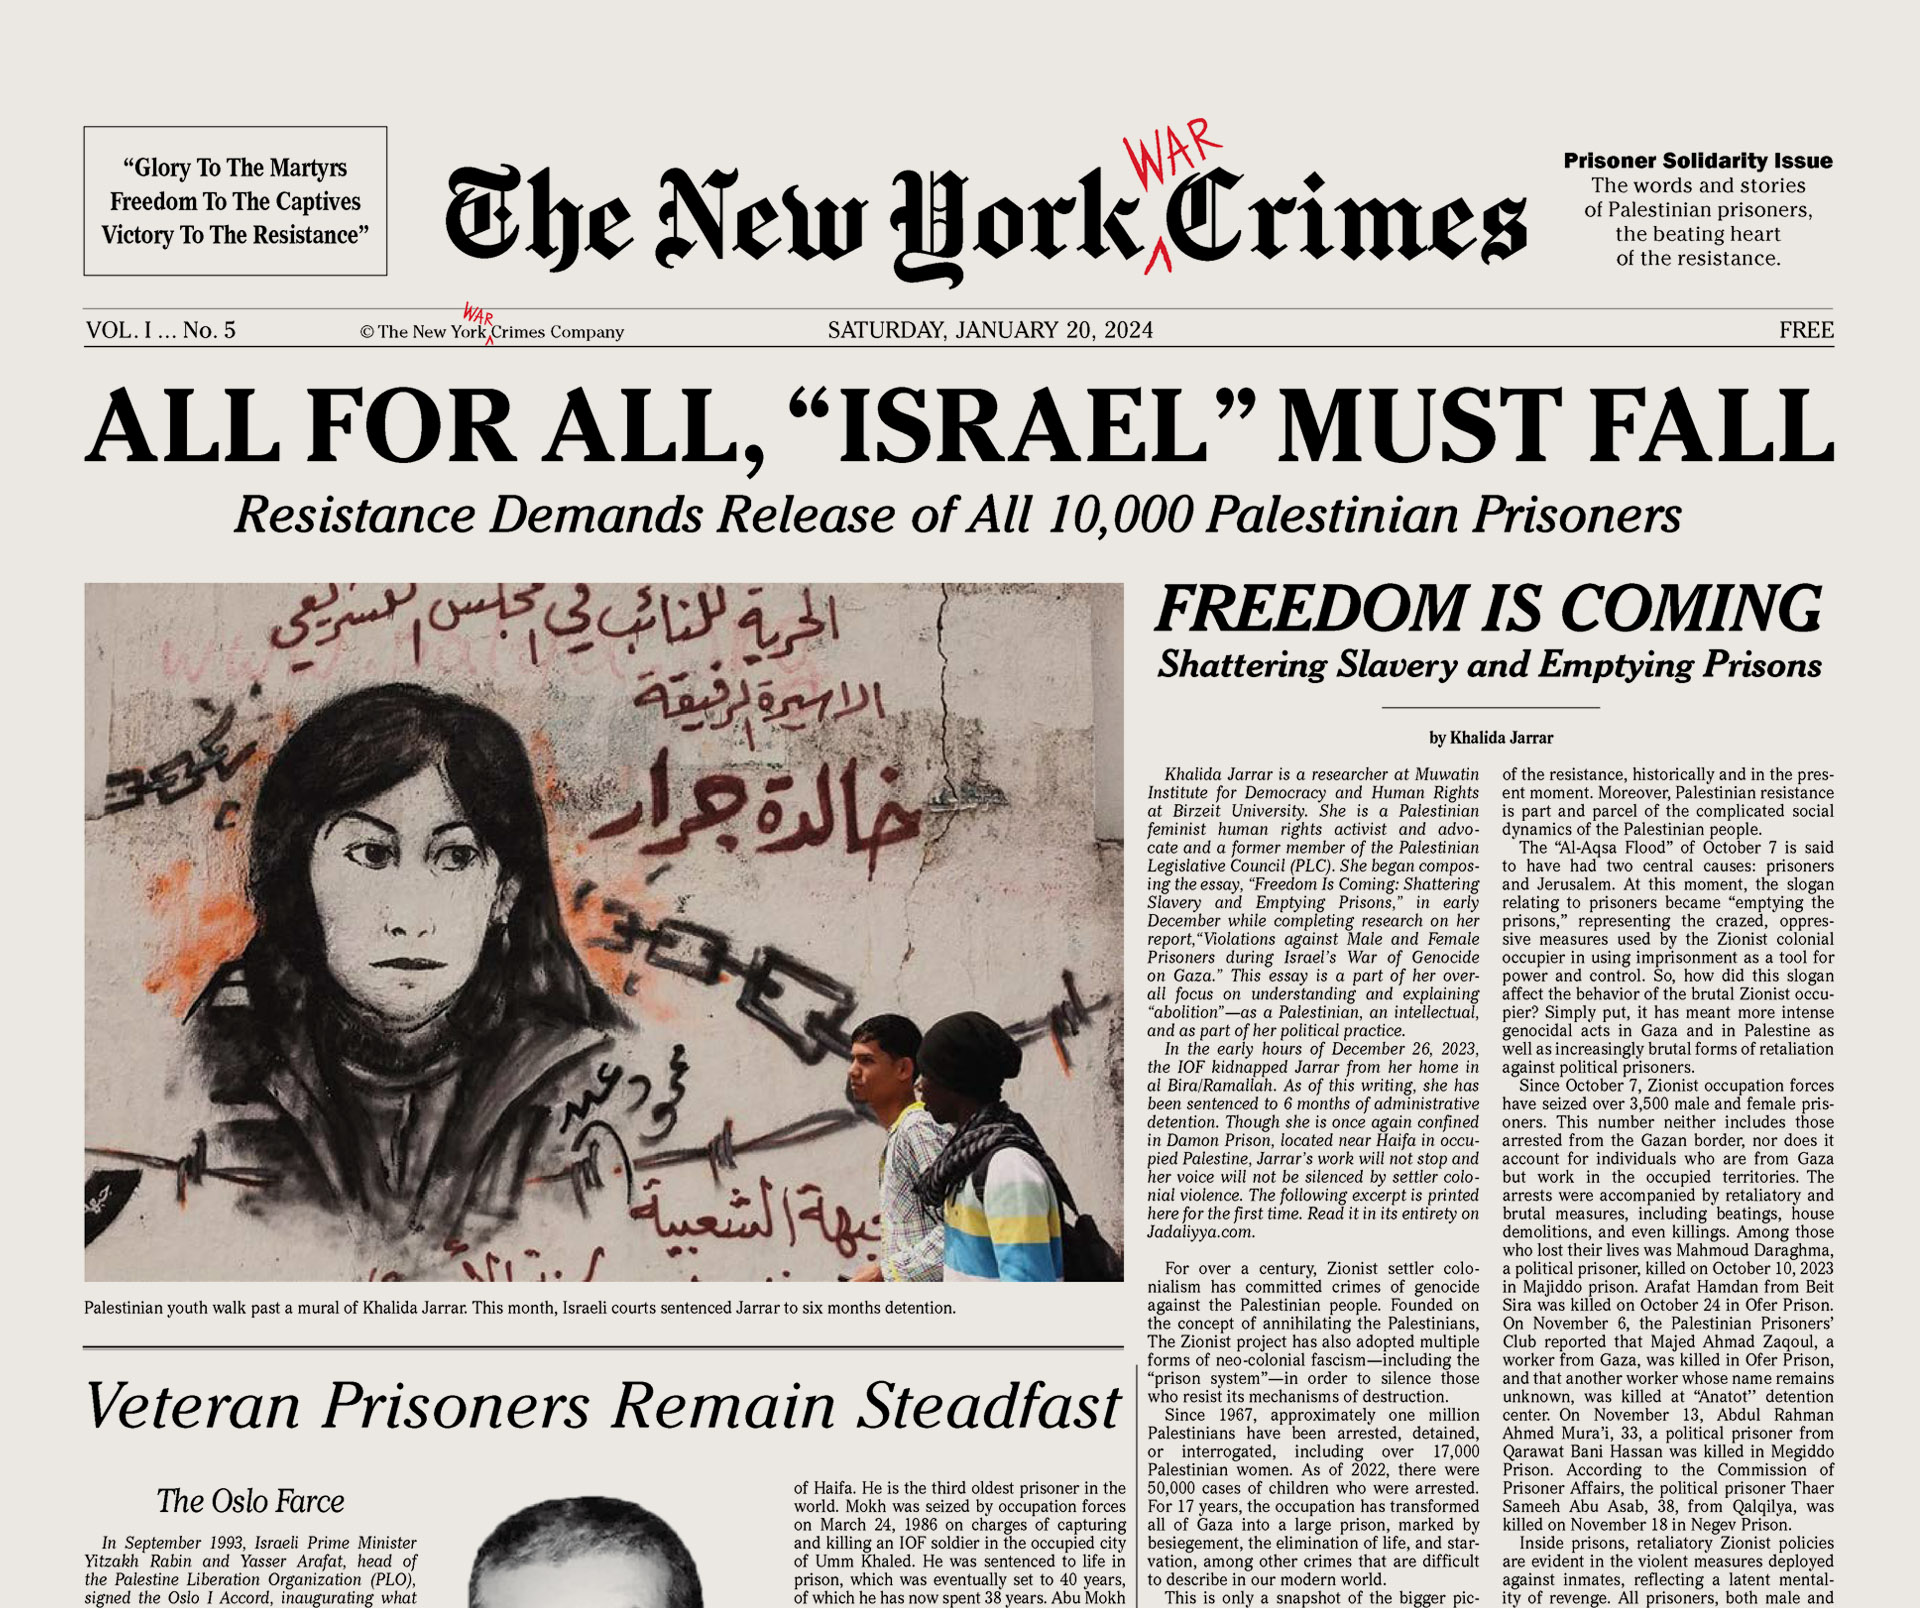 https://newyorkwarcrimes.com/media/pages/print-issue-vol-i-no-5-all-for-all-israel-must-fall/ccc77d2d62-1709308545/ny-crimes-05-cover.jpg